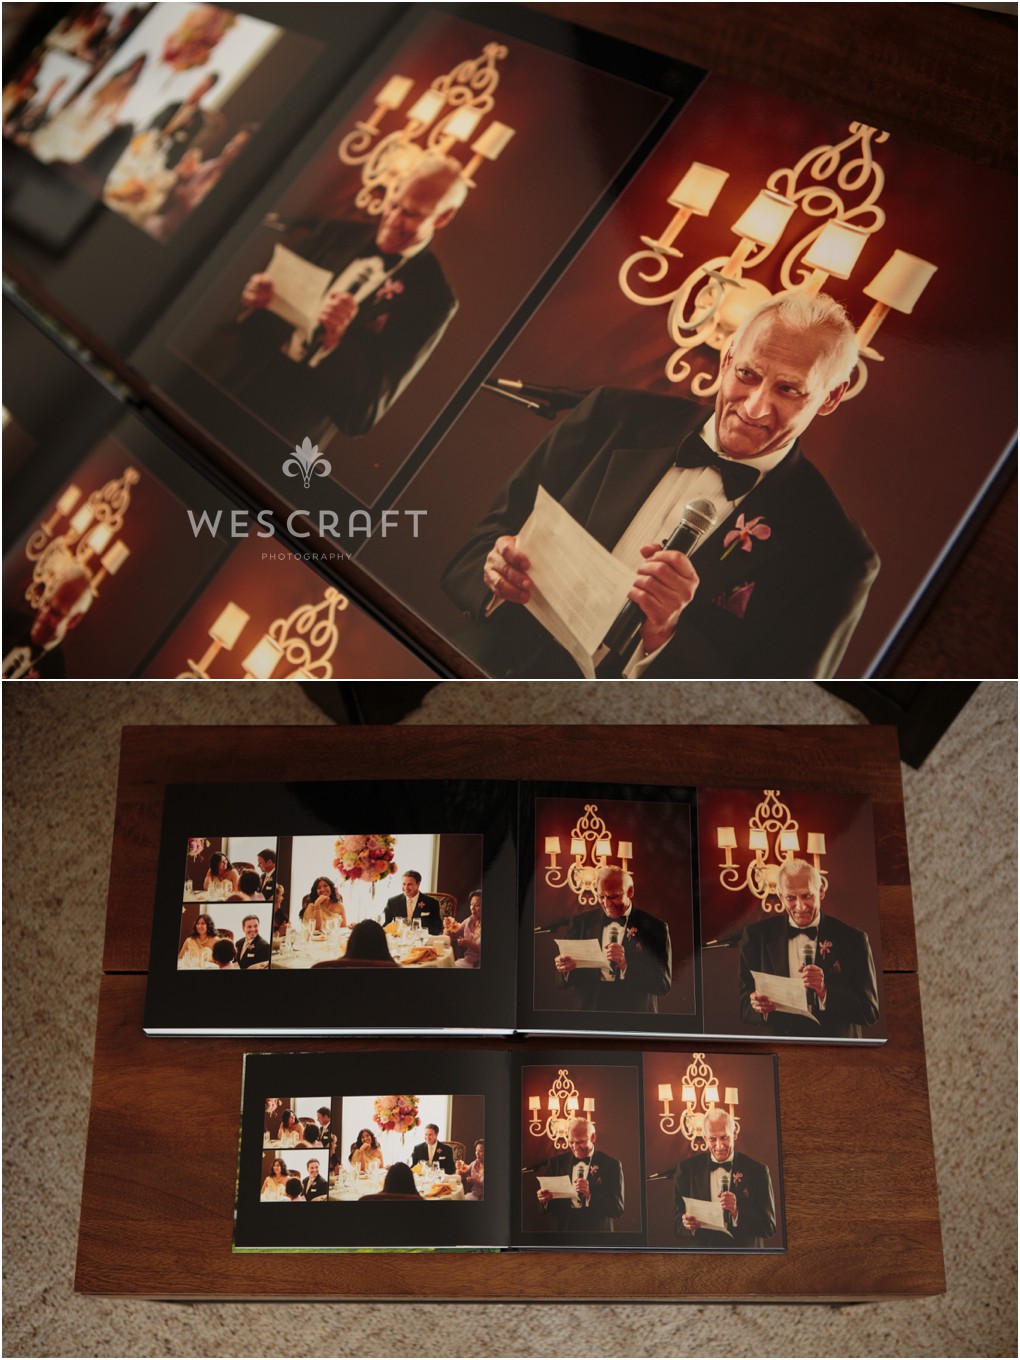 When your father gives such a great speech he deserves his own copy of the wedding album.  The parent books are mini replicas of the master album and share the same design.